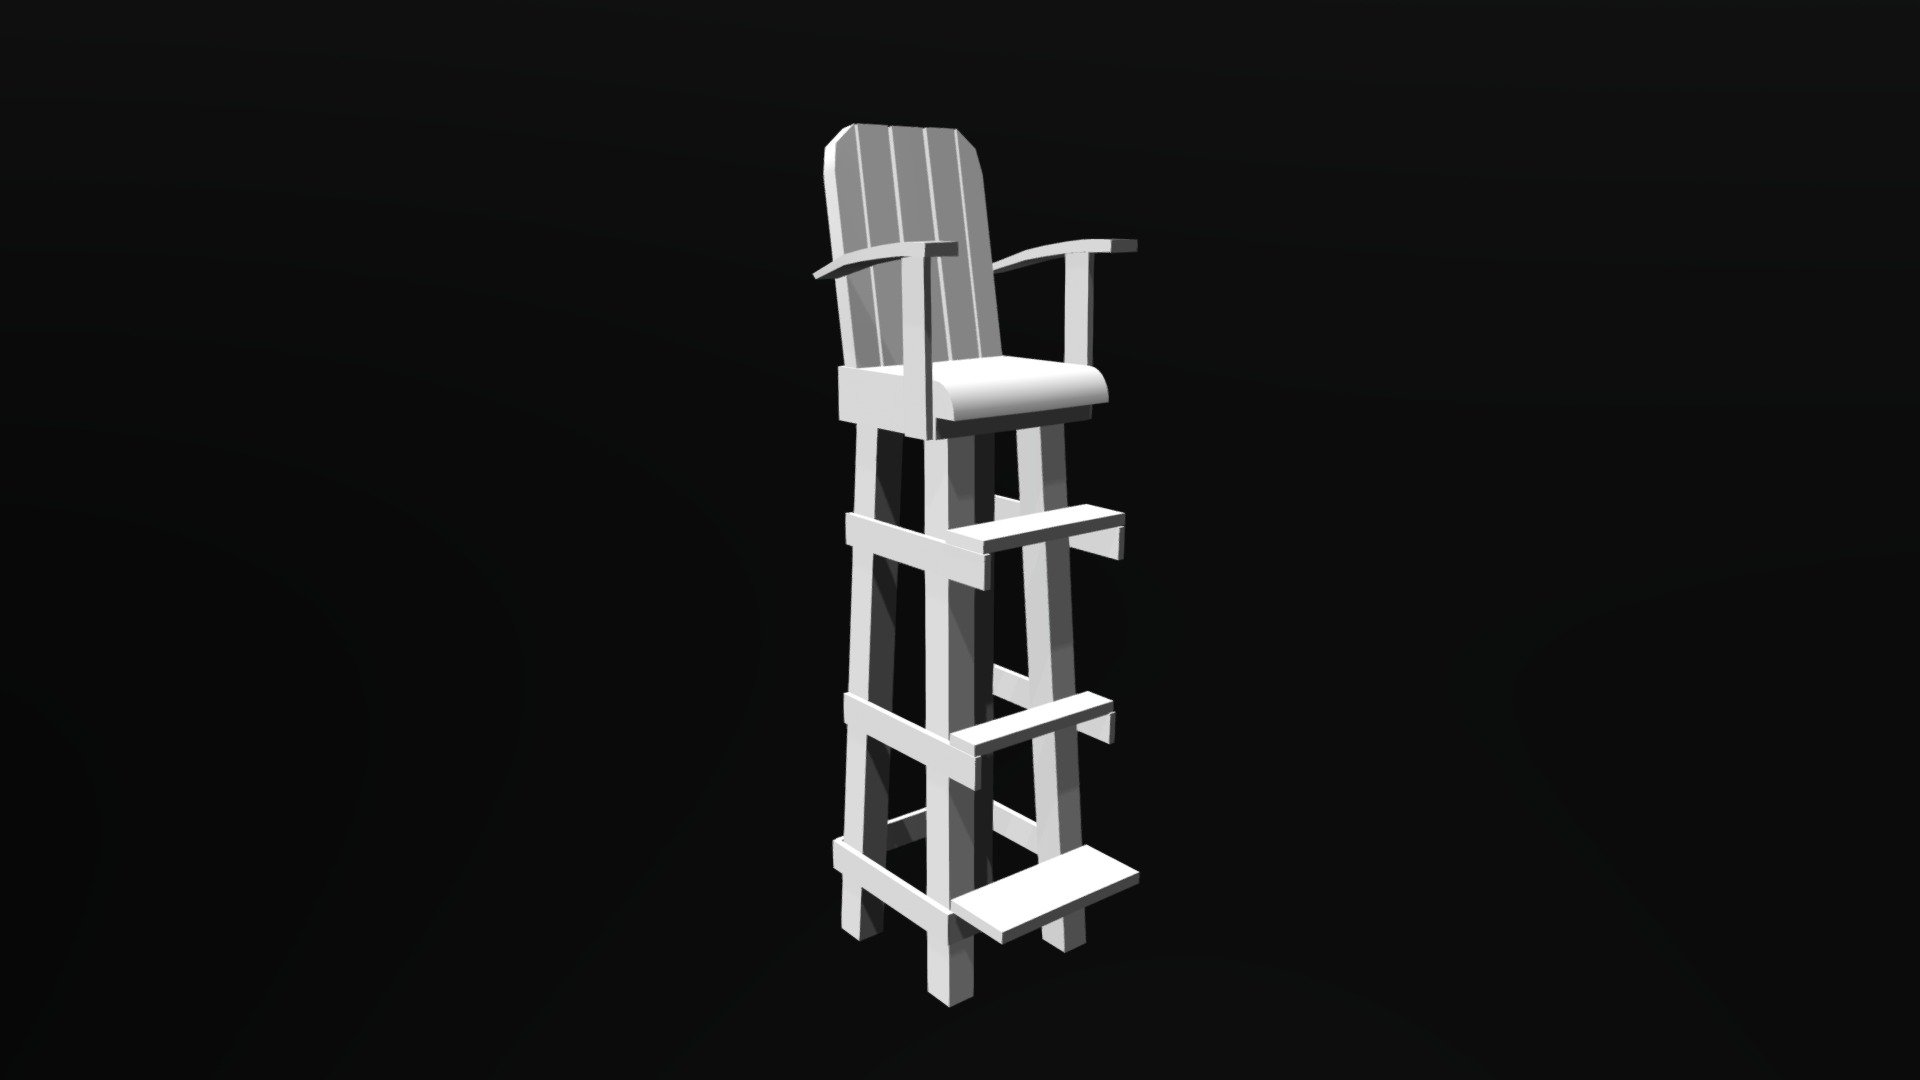 low poly game asset - Lifeguard chair - 3D model by miromyboy 3d model